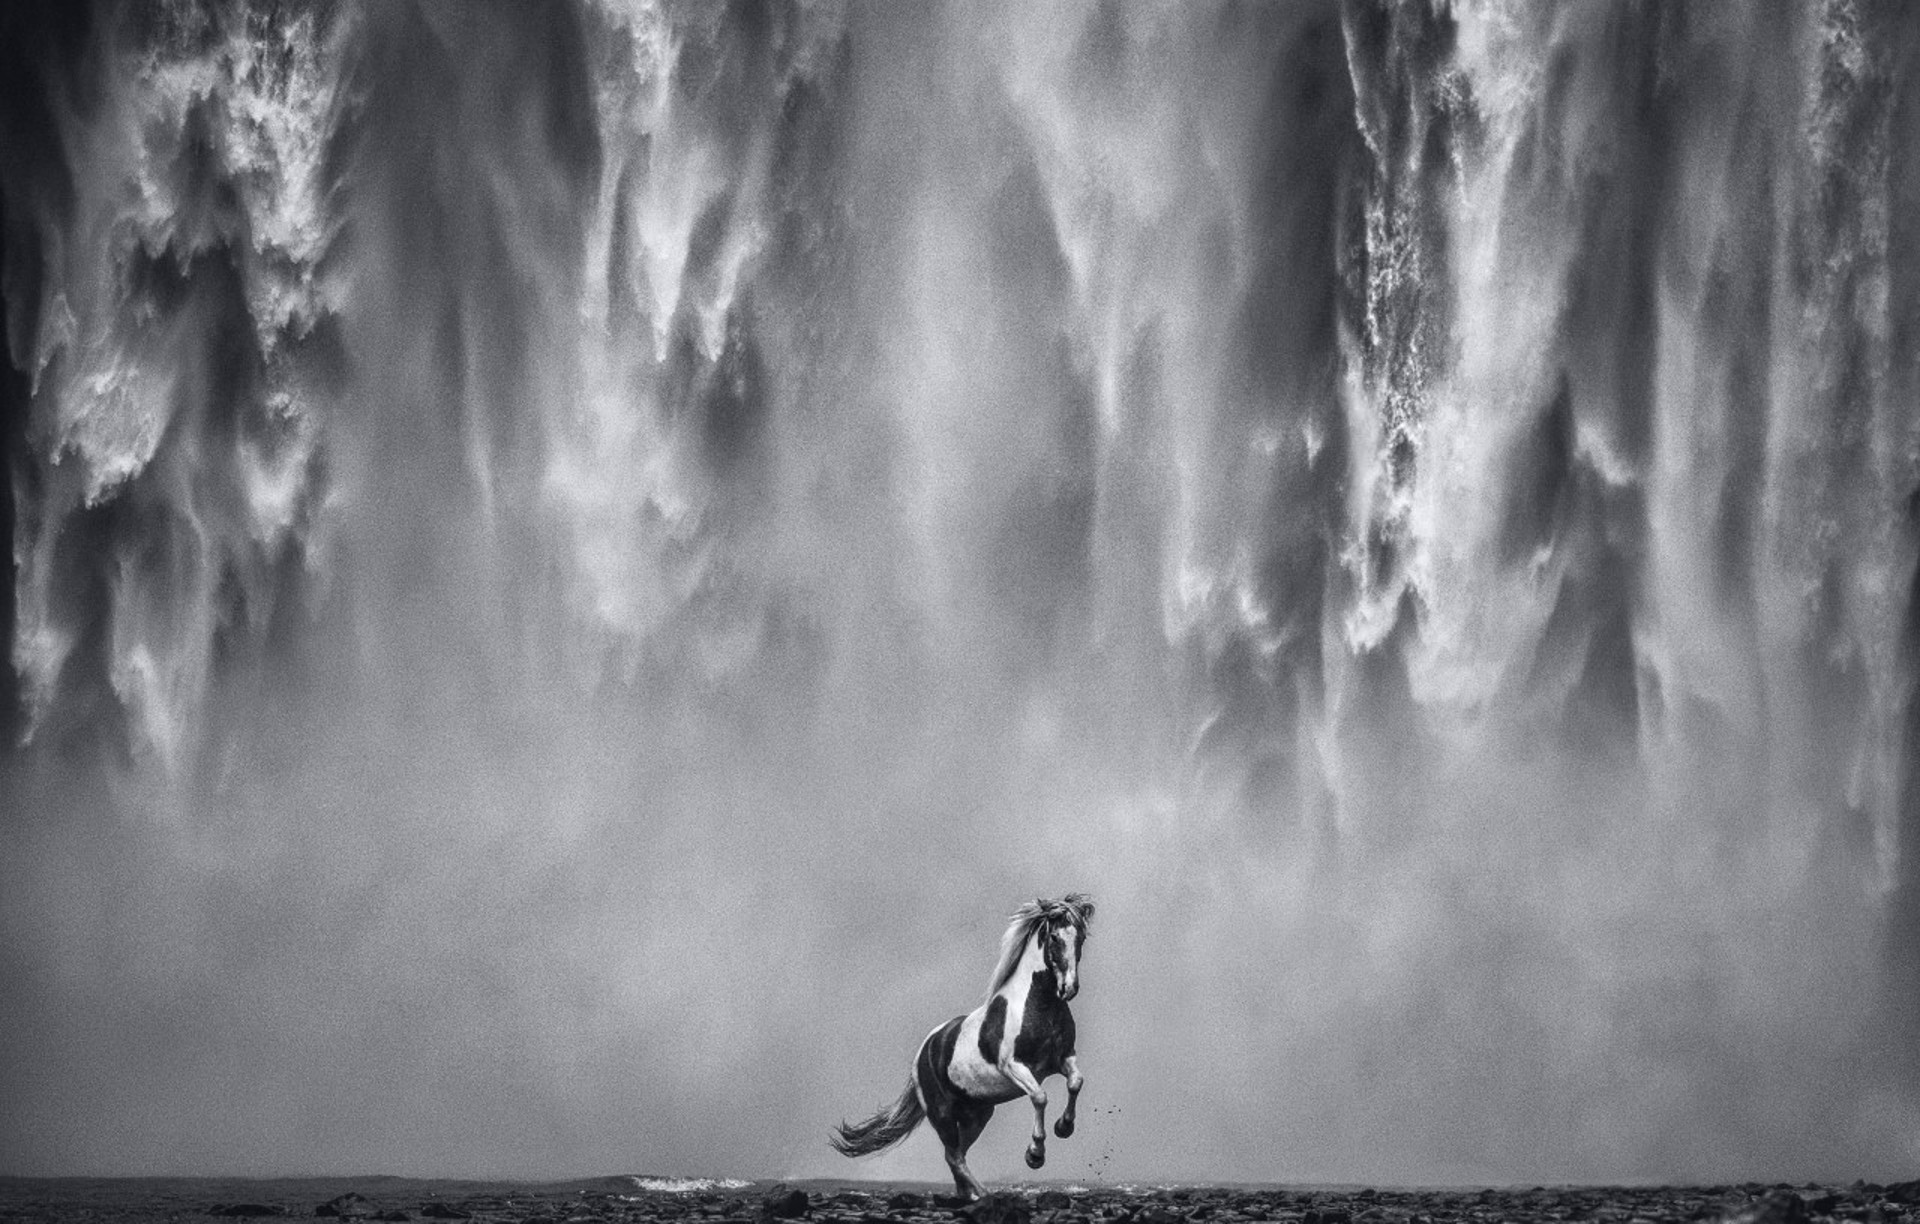 Legends of the Fall by David Yarrow